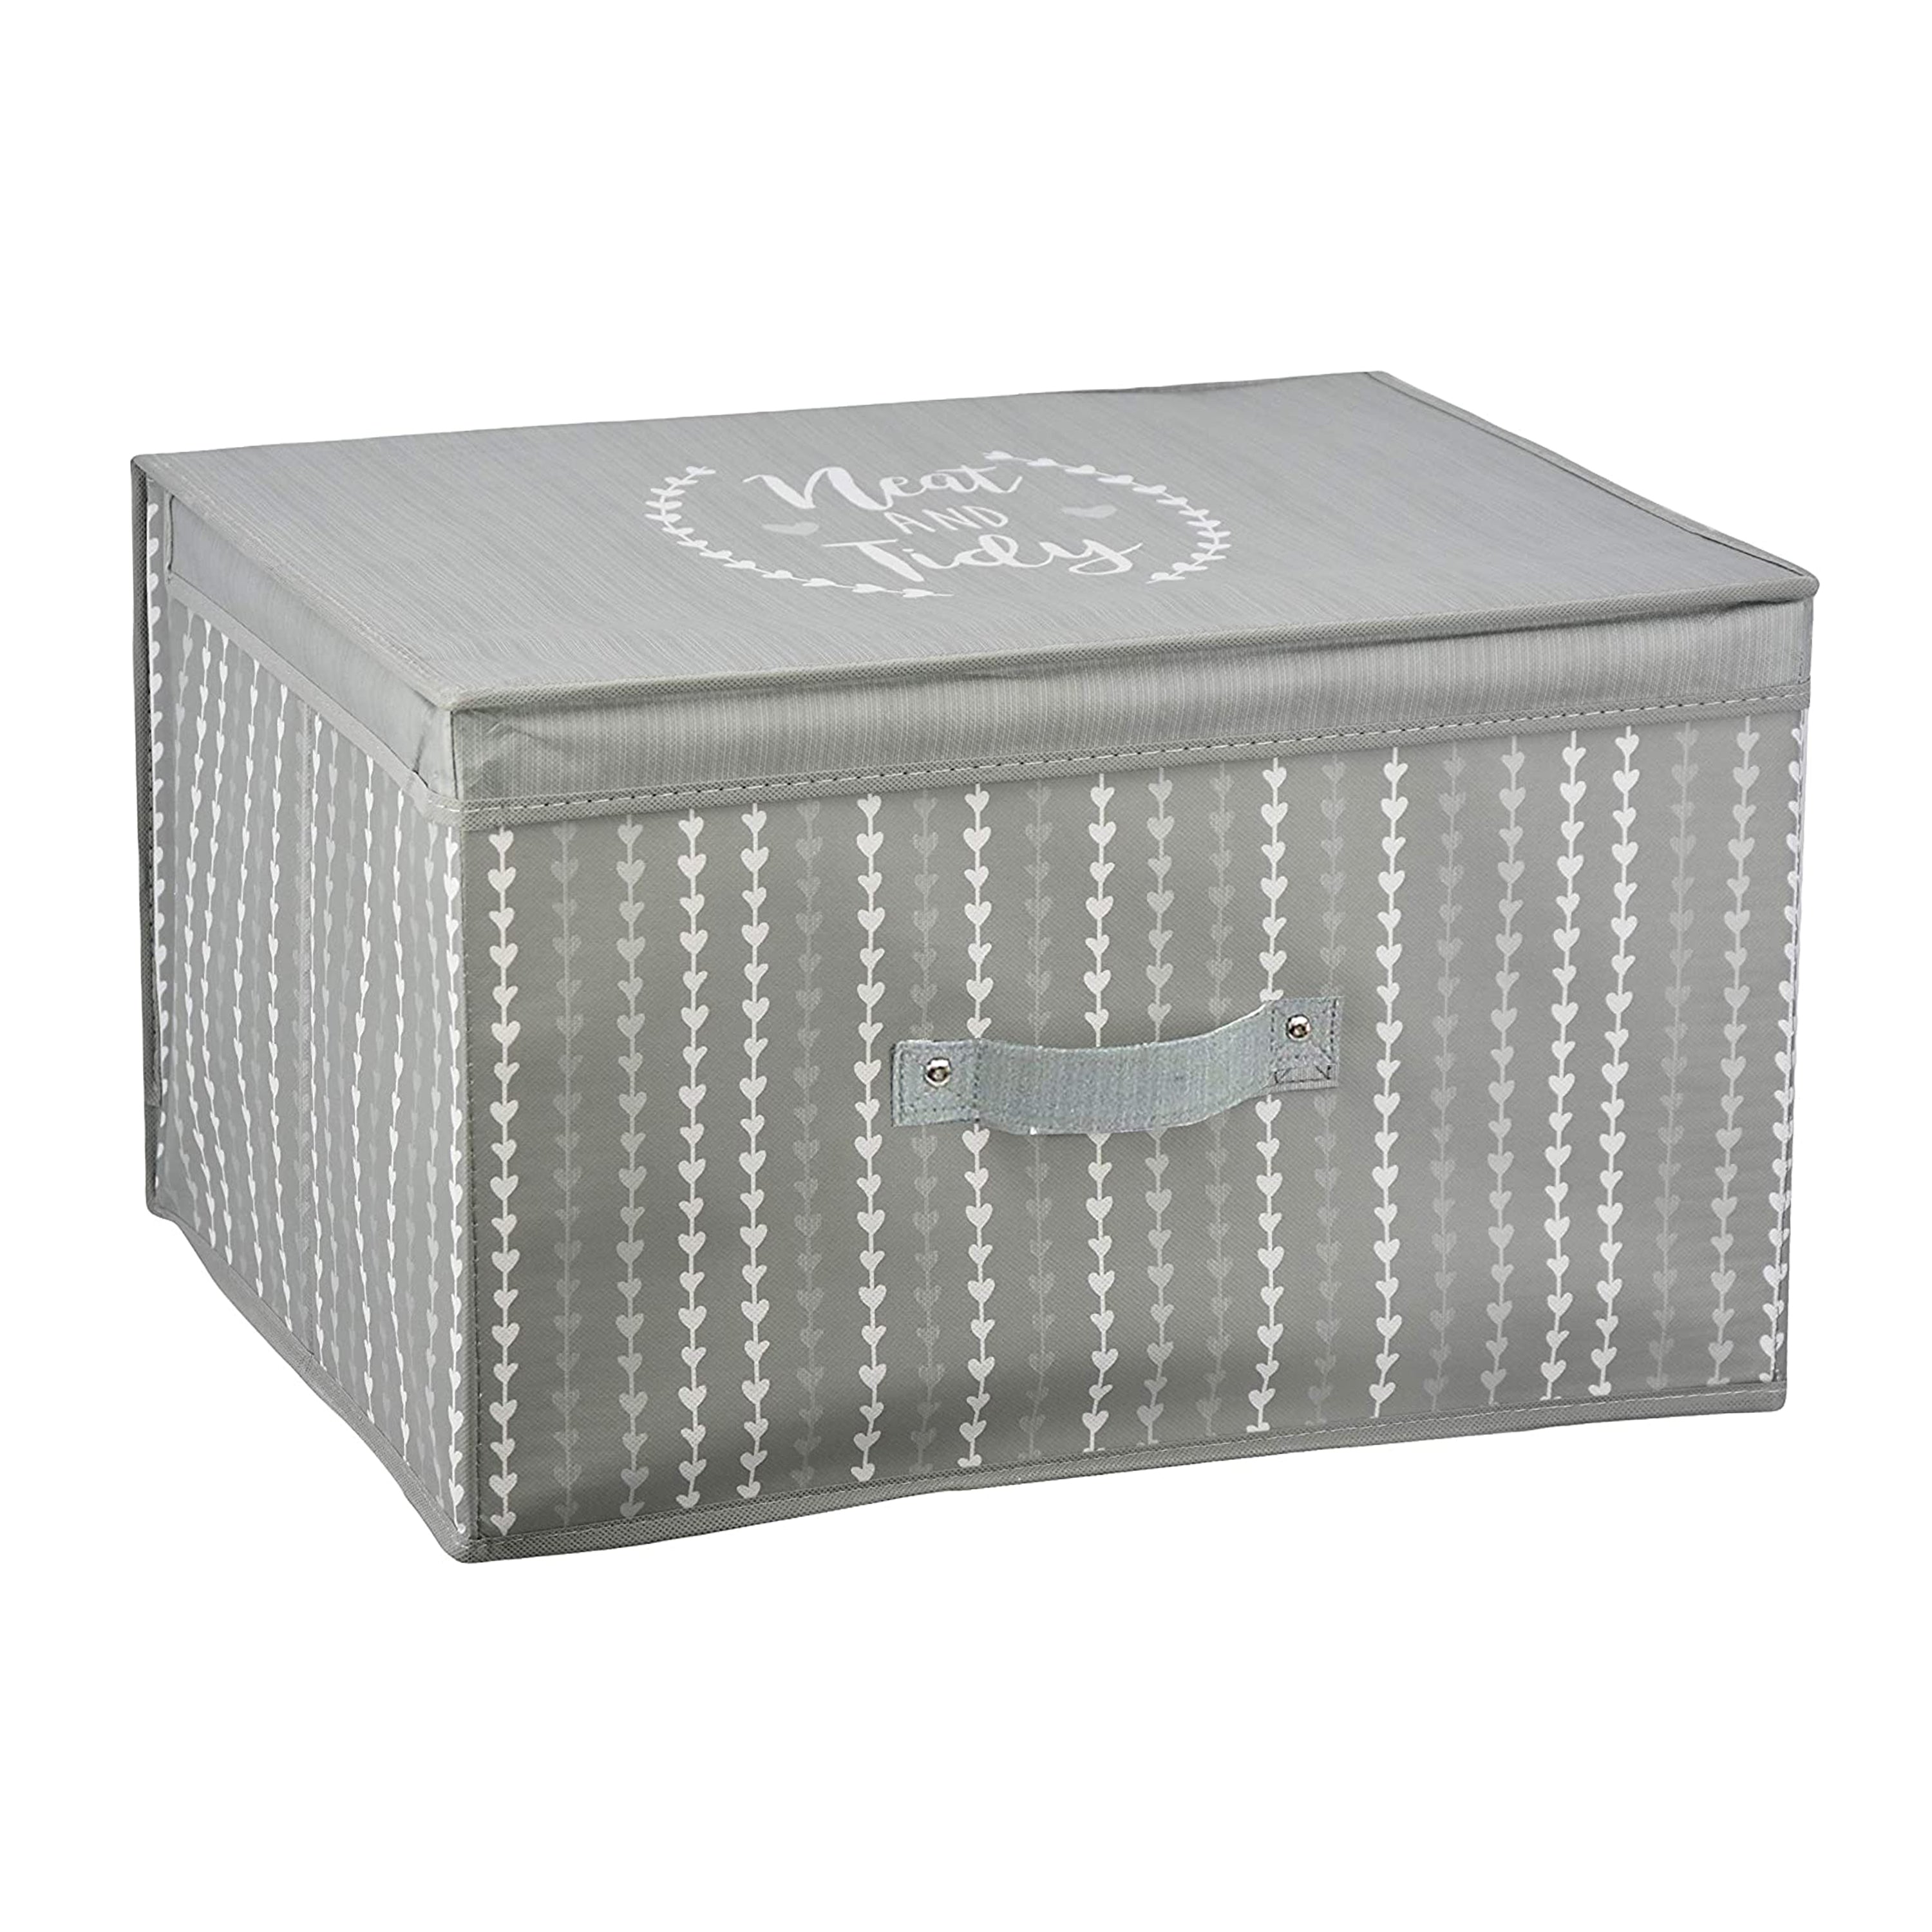 Gray Hearts Large Storage Box GEEZY - The Magic Toy Shop